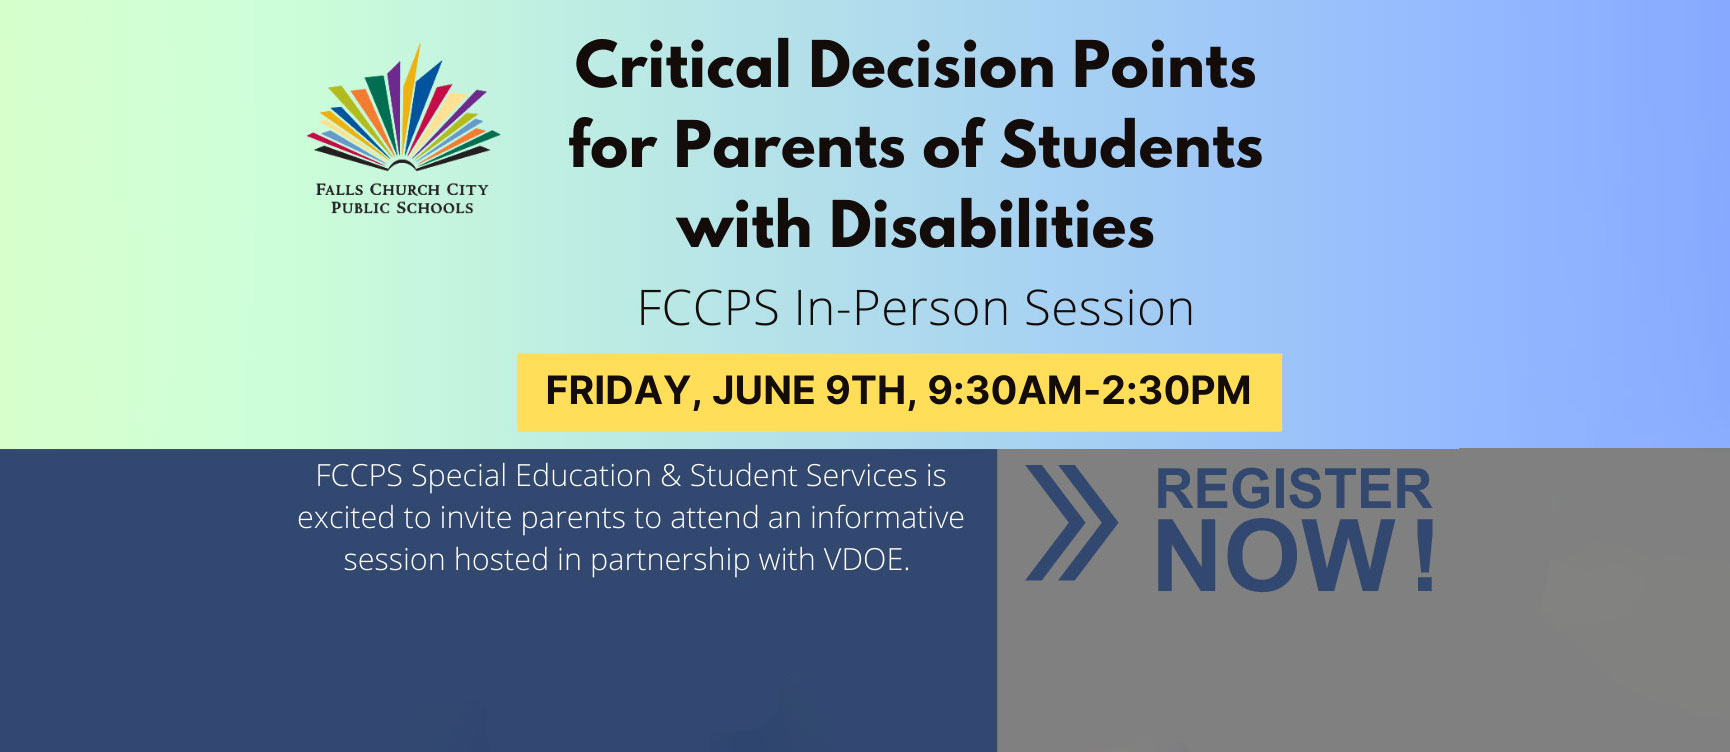 Scritical Decision Points for Parents of Students with Disabilities - Friday June 9th 9:30 am to 2:30 pm